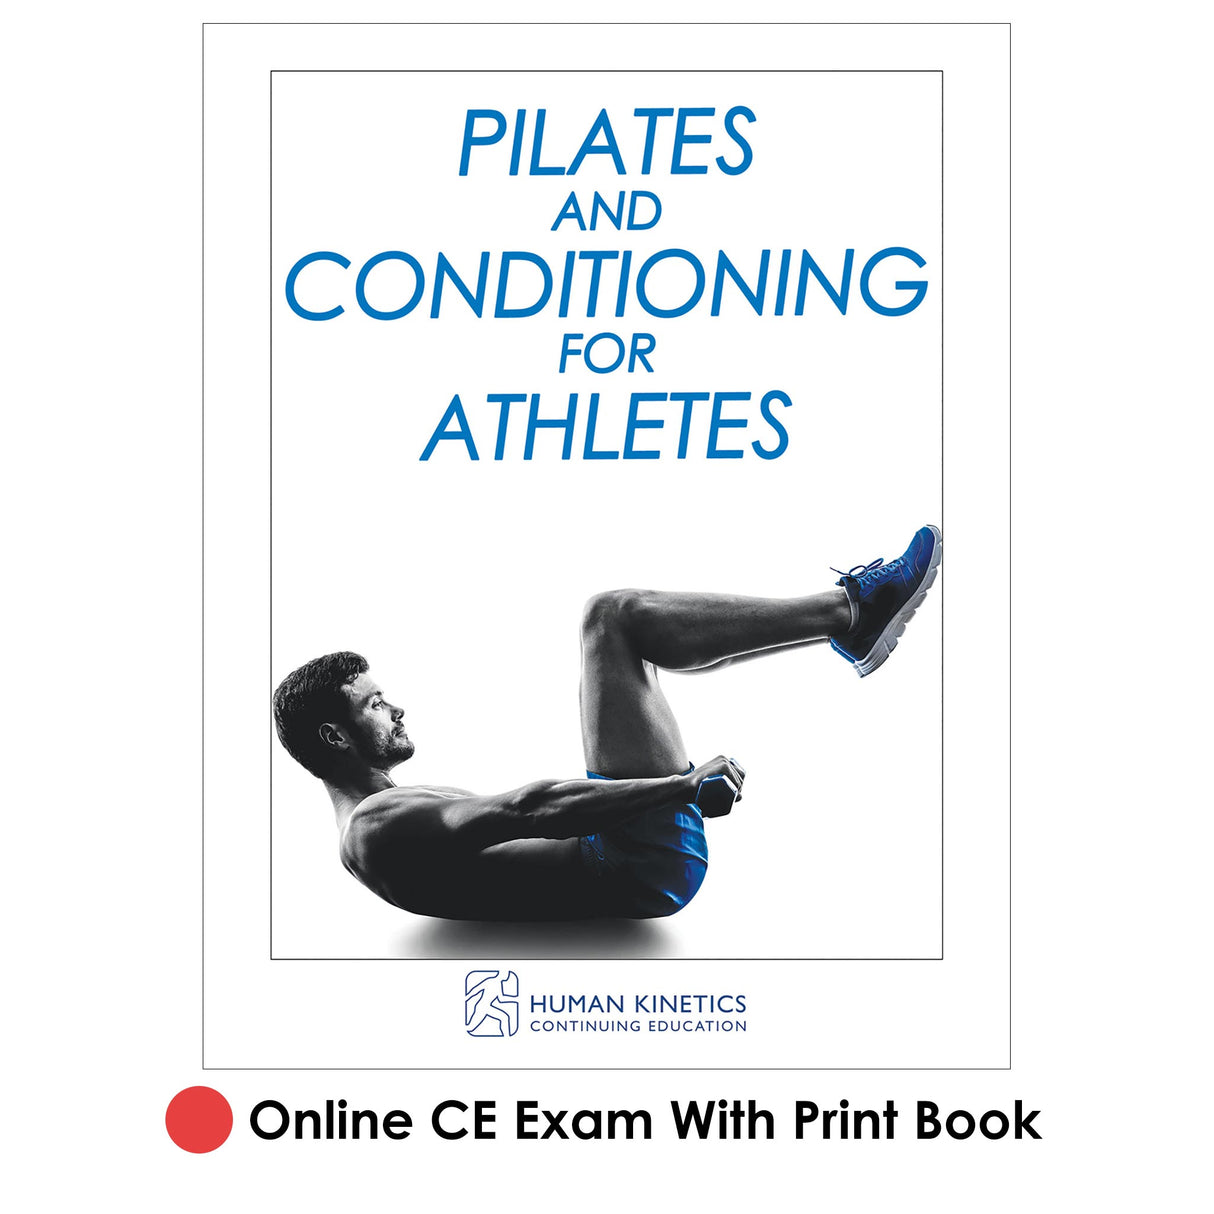 Pilates and Conditioning for Athletes Online CE Exam With Print Book